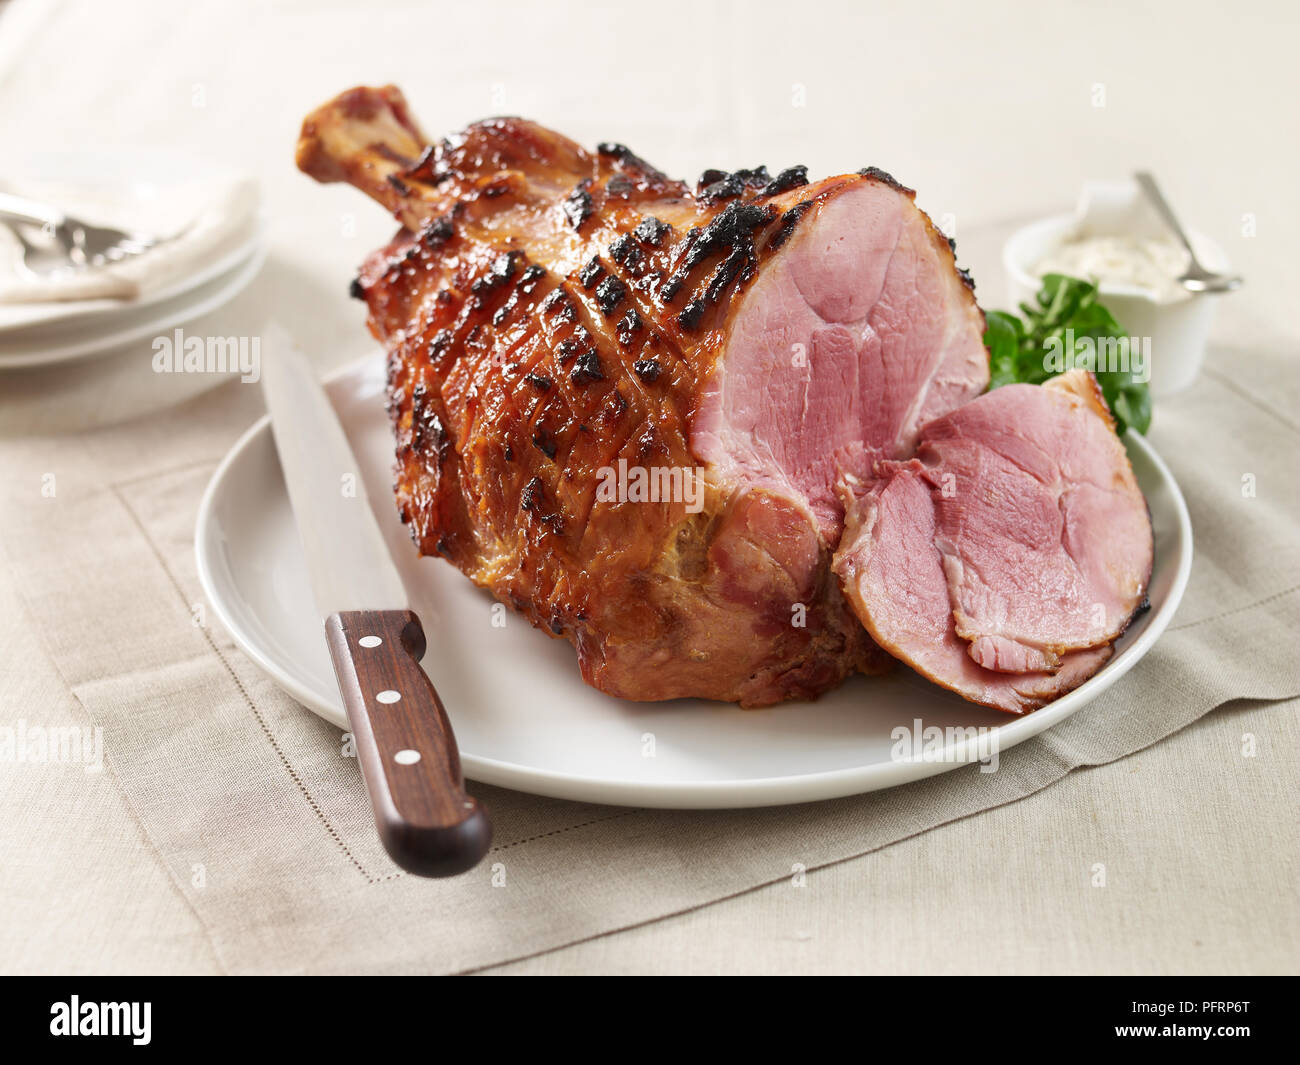 Mustard glazed ham on a plate, with a carving knife Stock Photo